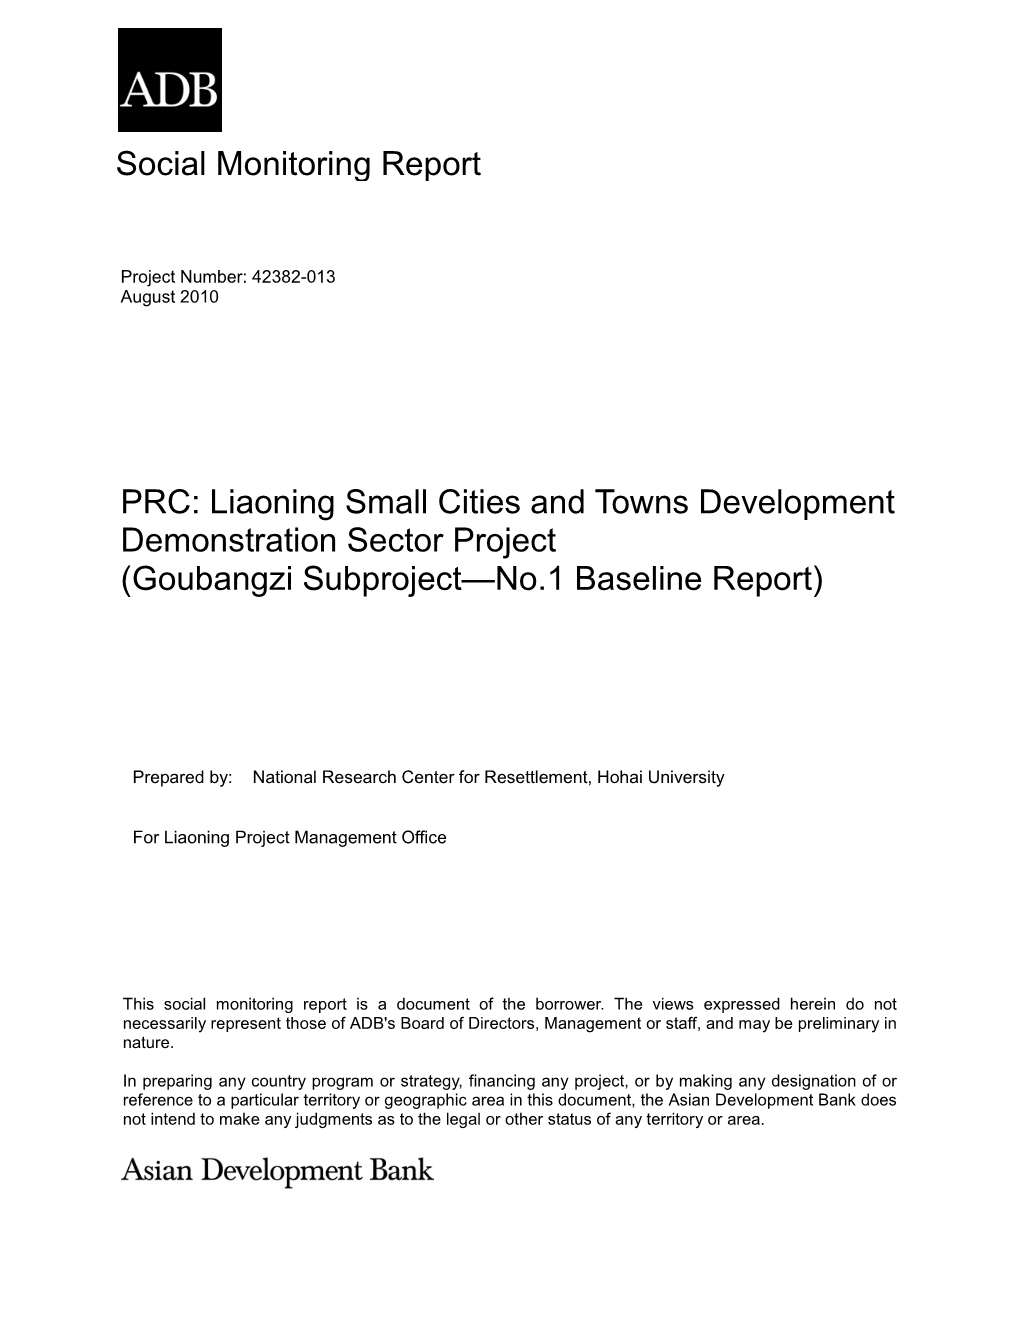 Social Monitoring Report PRC: Liaoning Small Cities and Towns